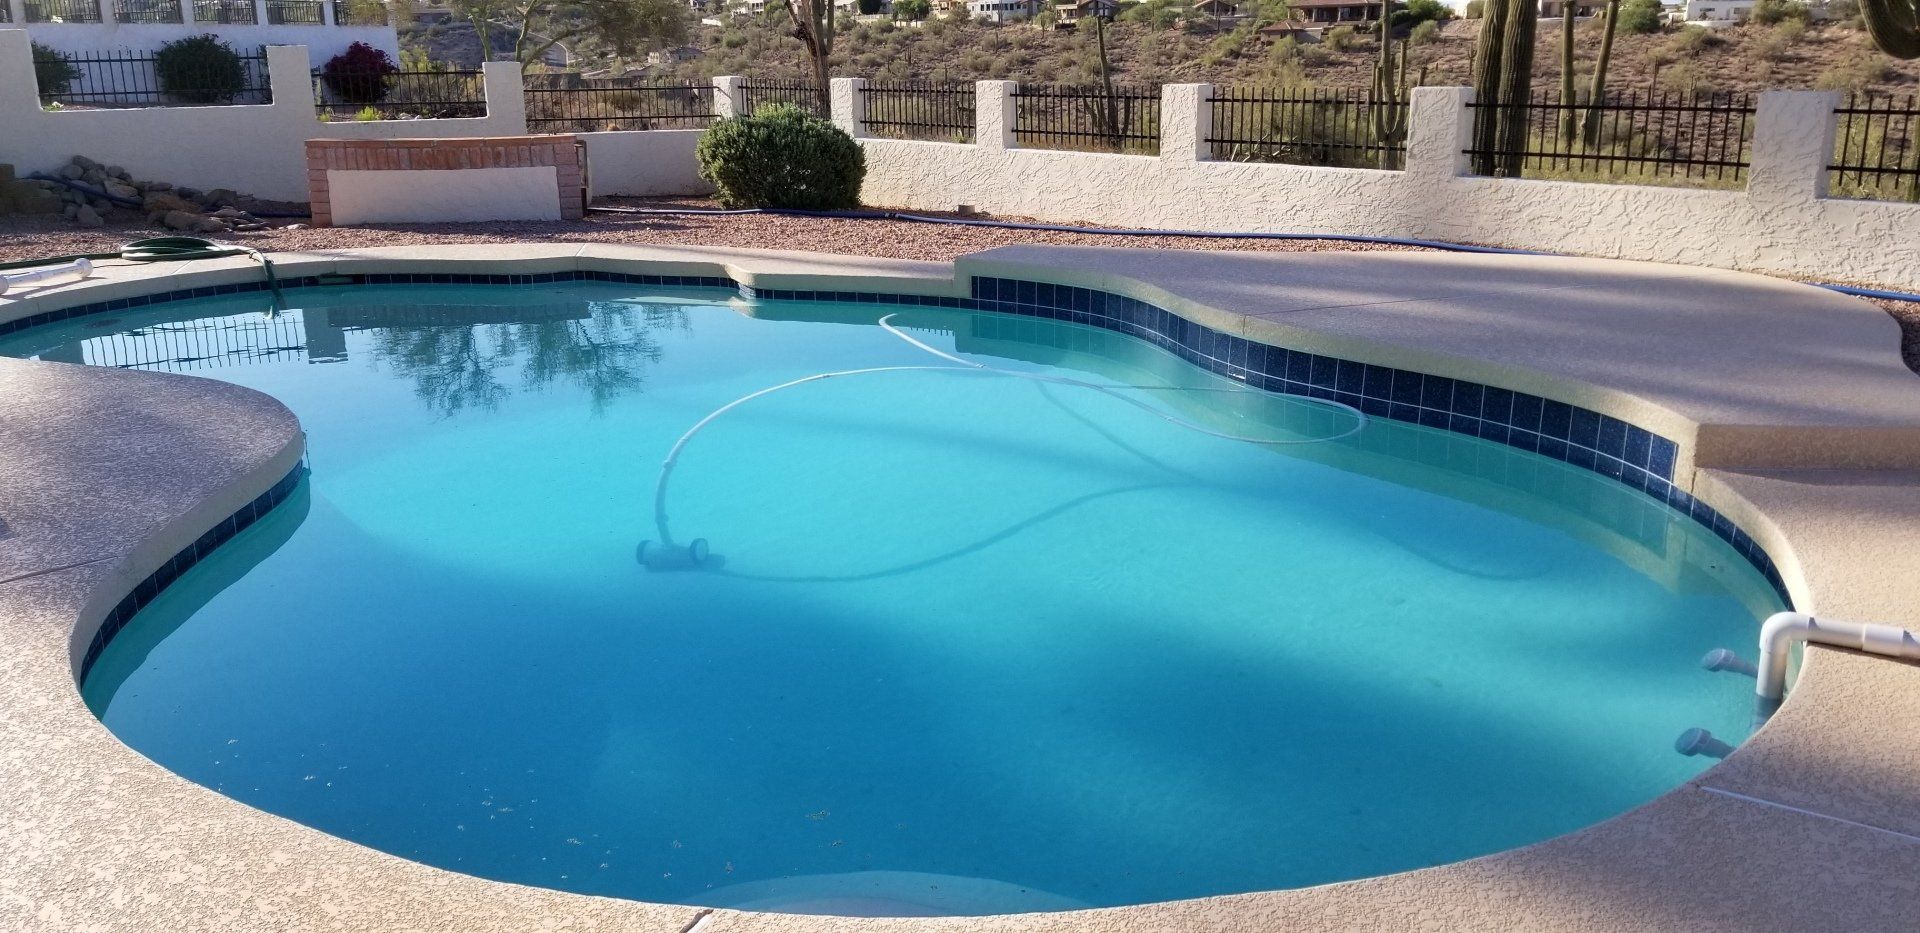 Pool Draining in Scottsdale, AZ | No Drainer Water Purification Services